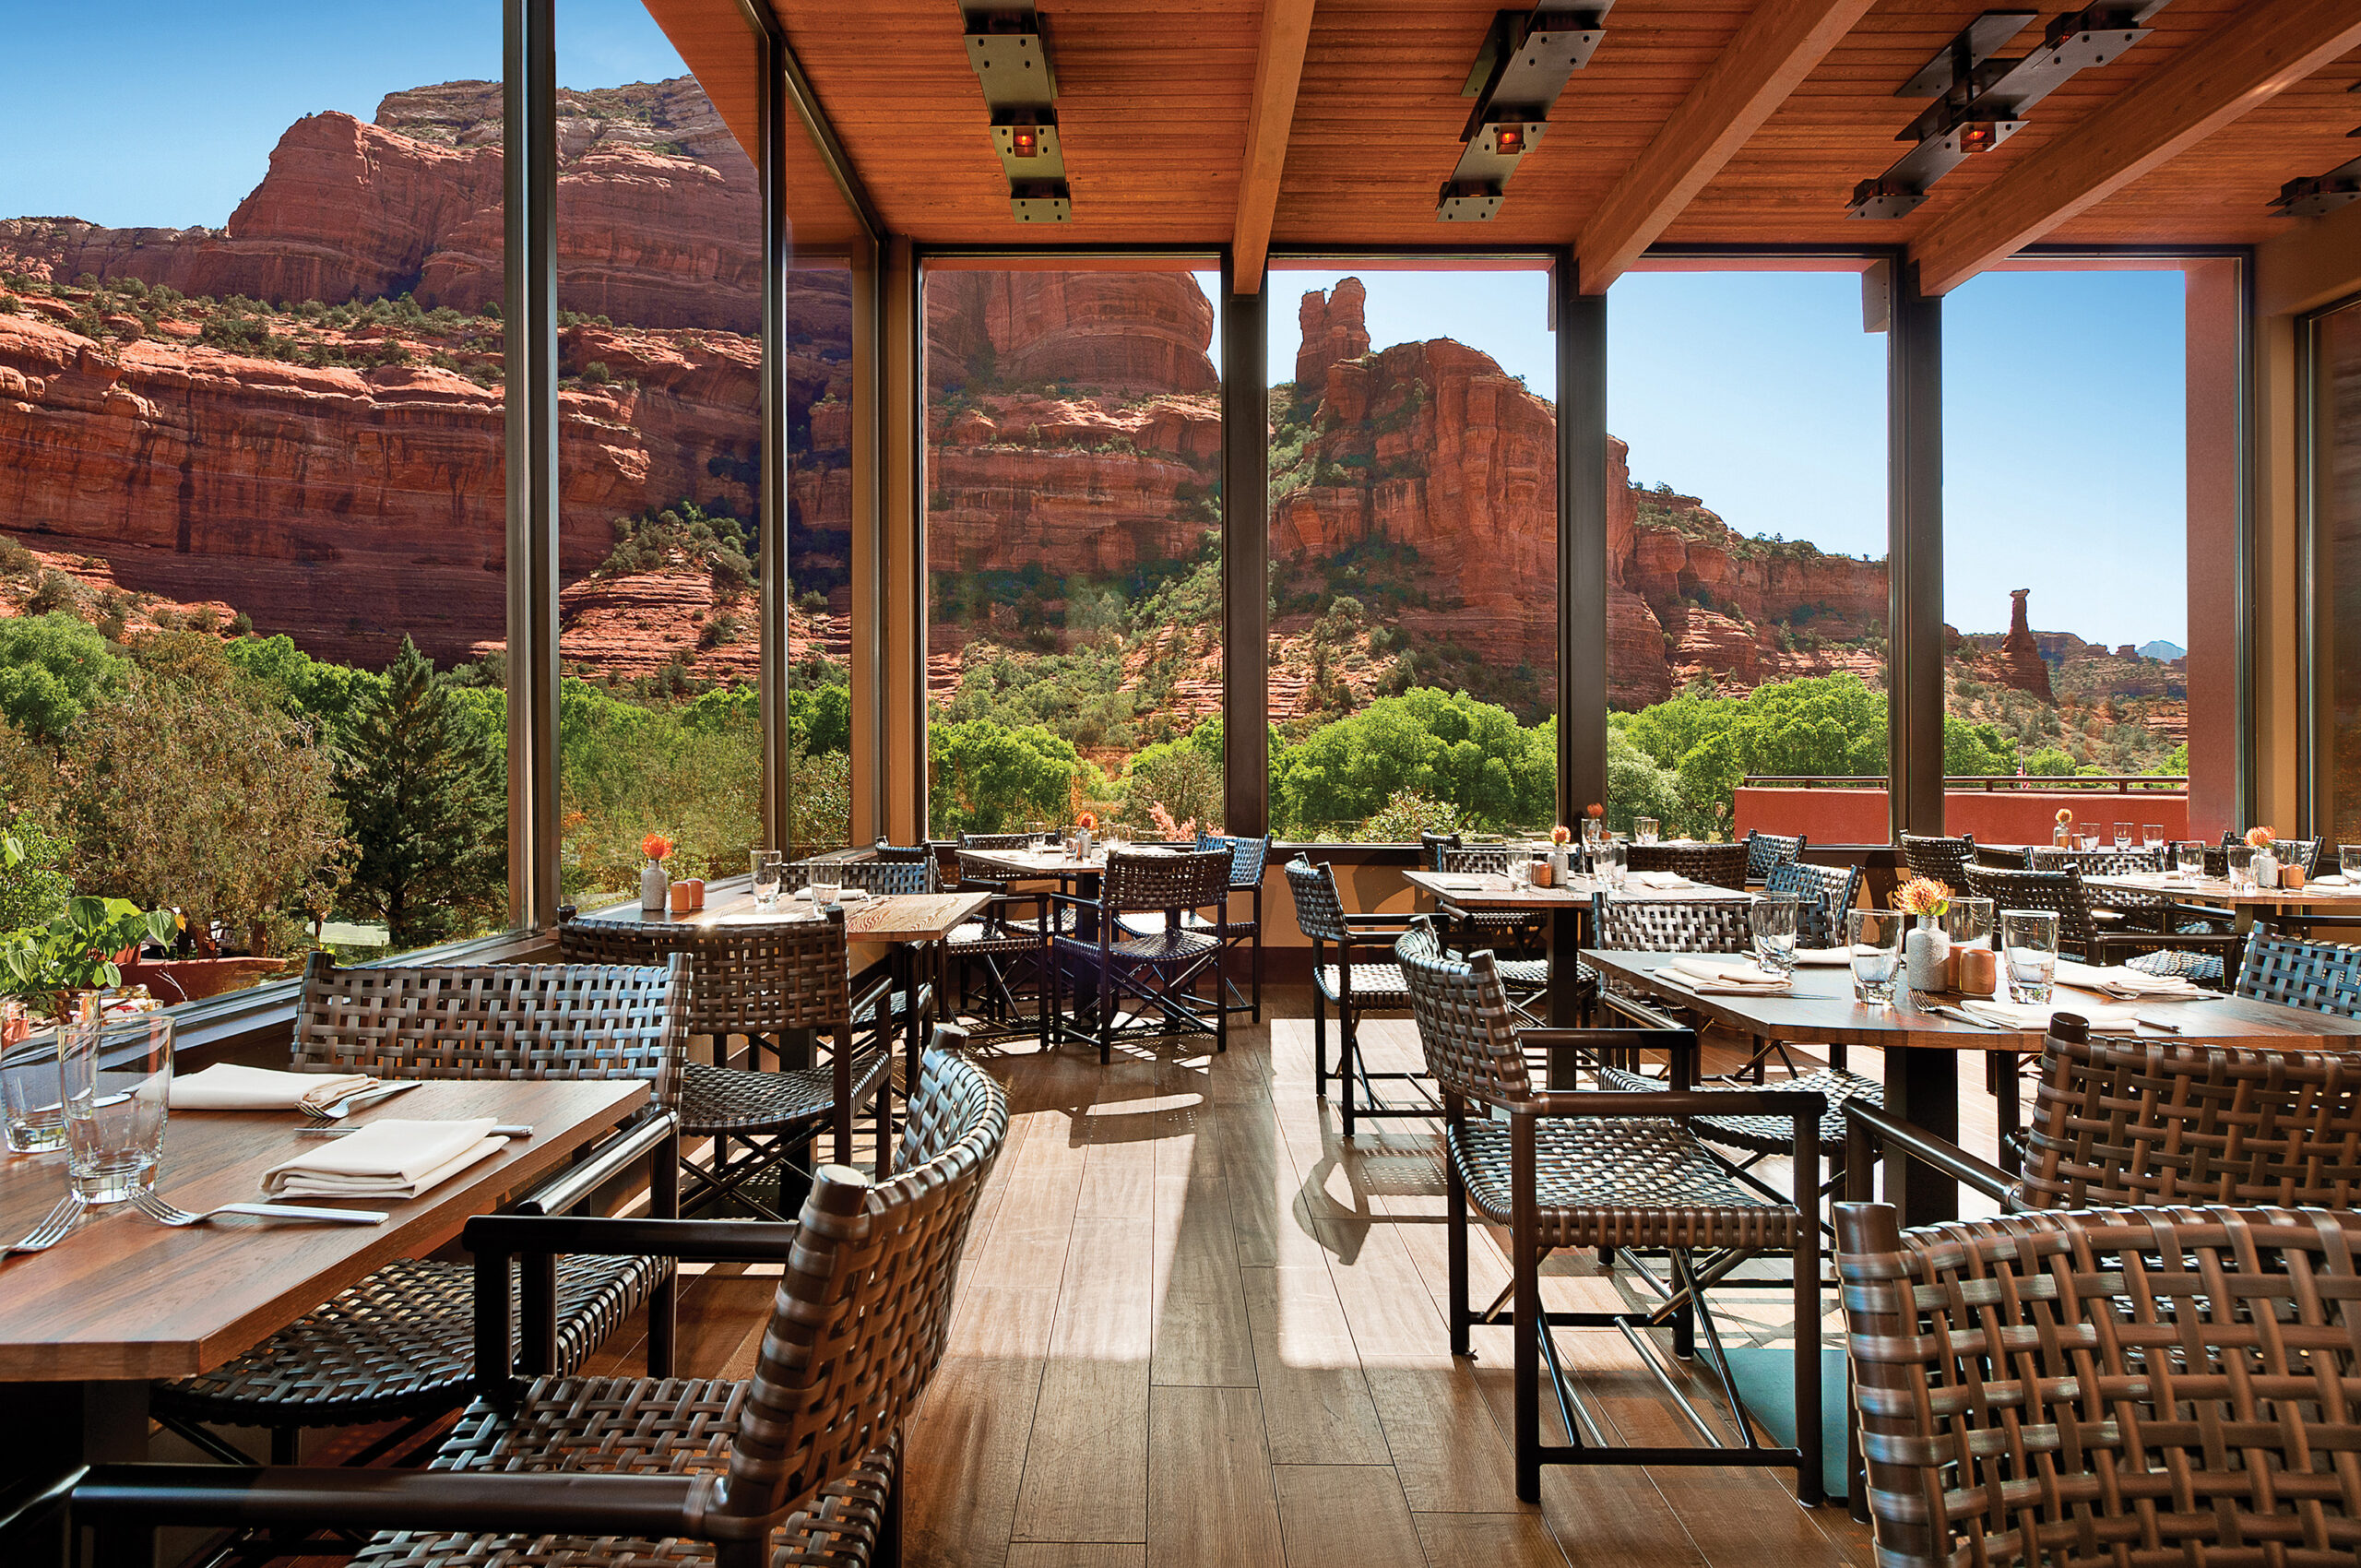 Dining room with floor to ceiling windows overlooking the Sedona red rocks.